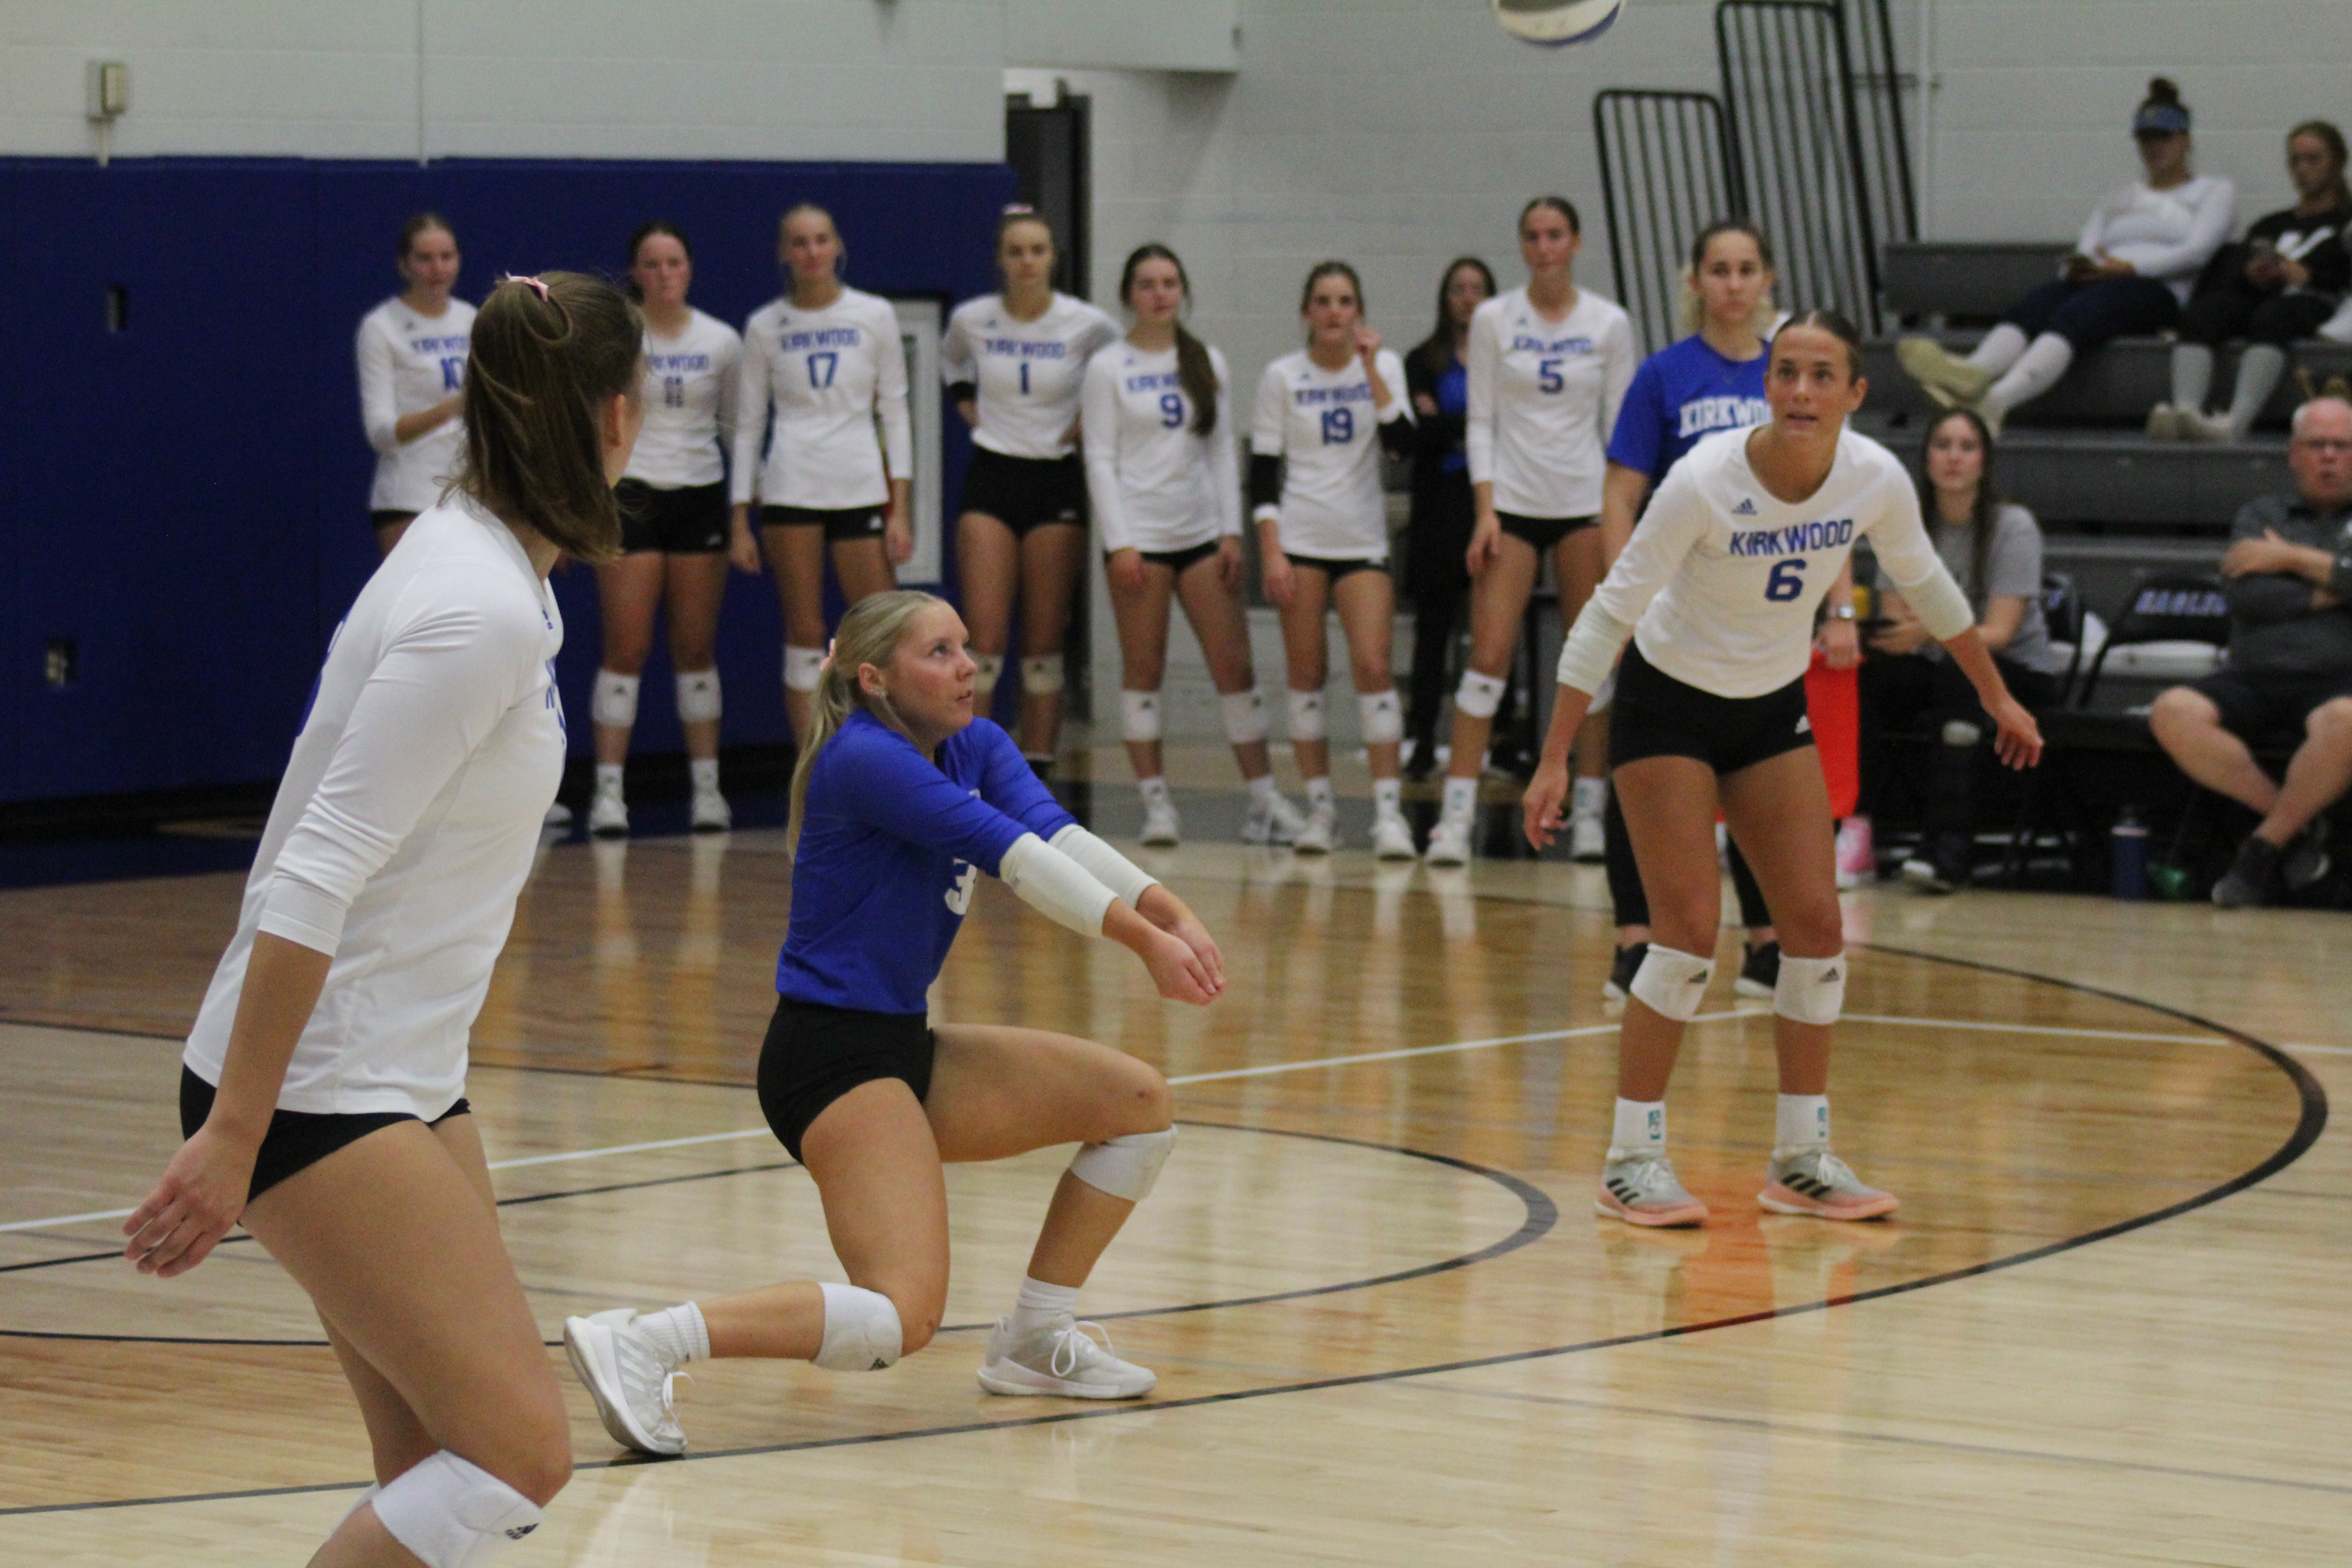 Lily Van Severen bumps the ball into air in volleyball match.